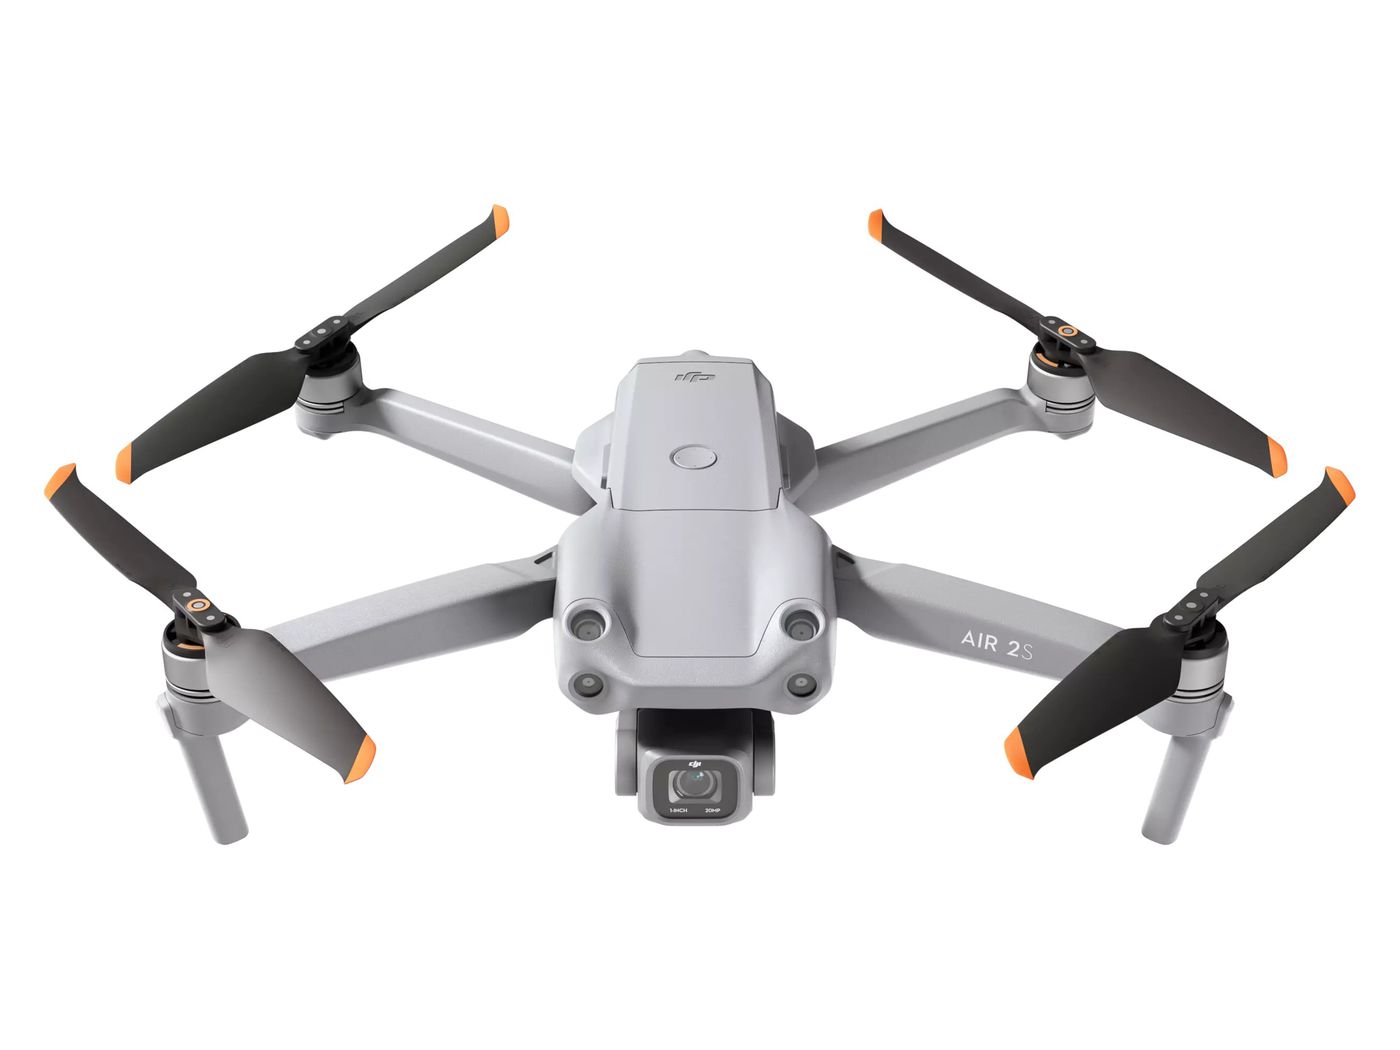 DJI Air 2S with improved camera sensor leaks in new image